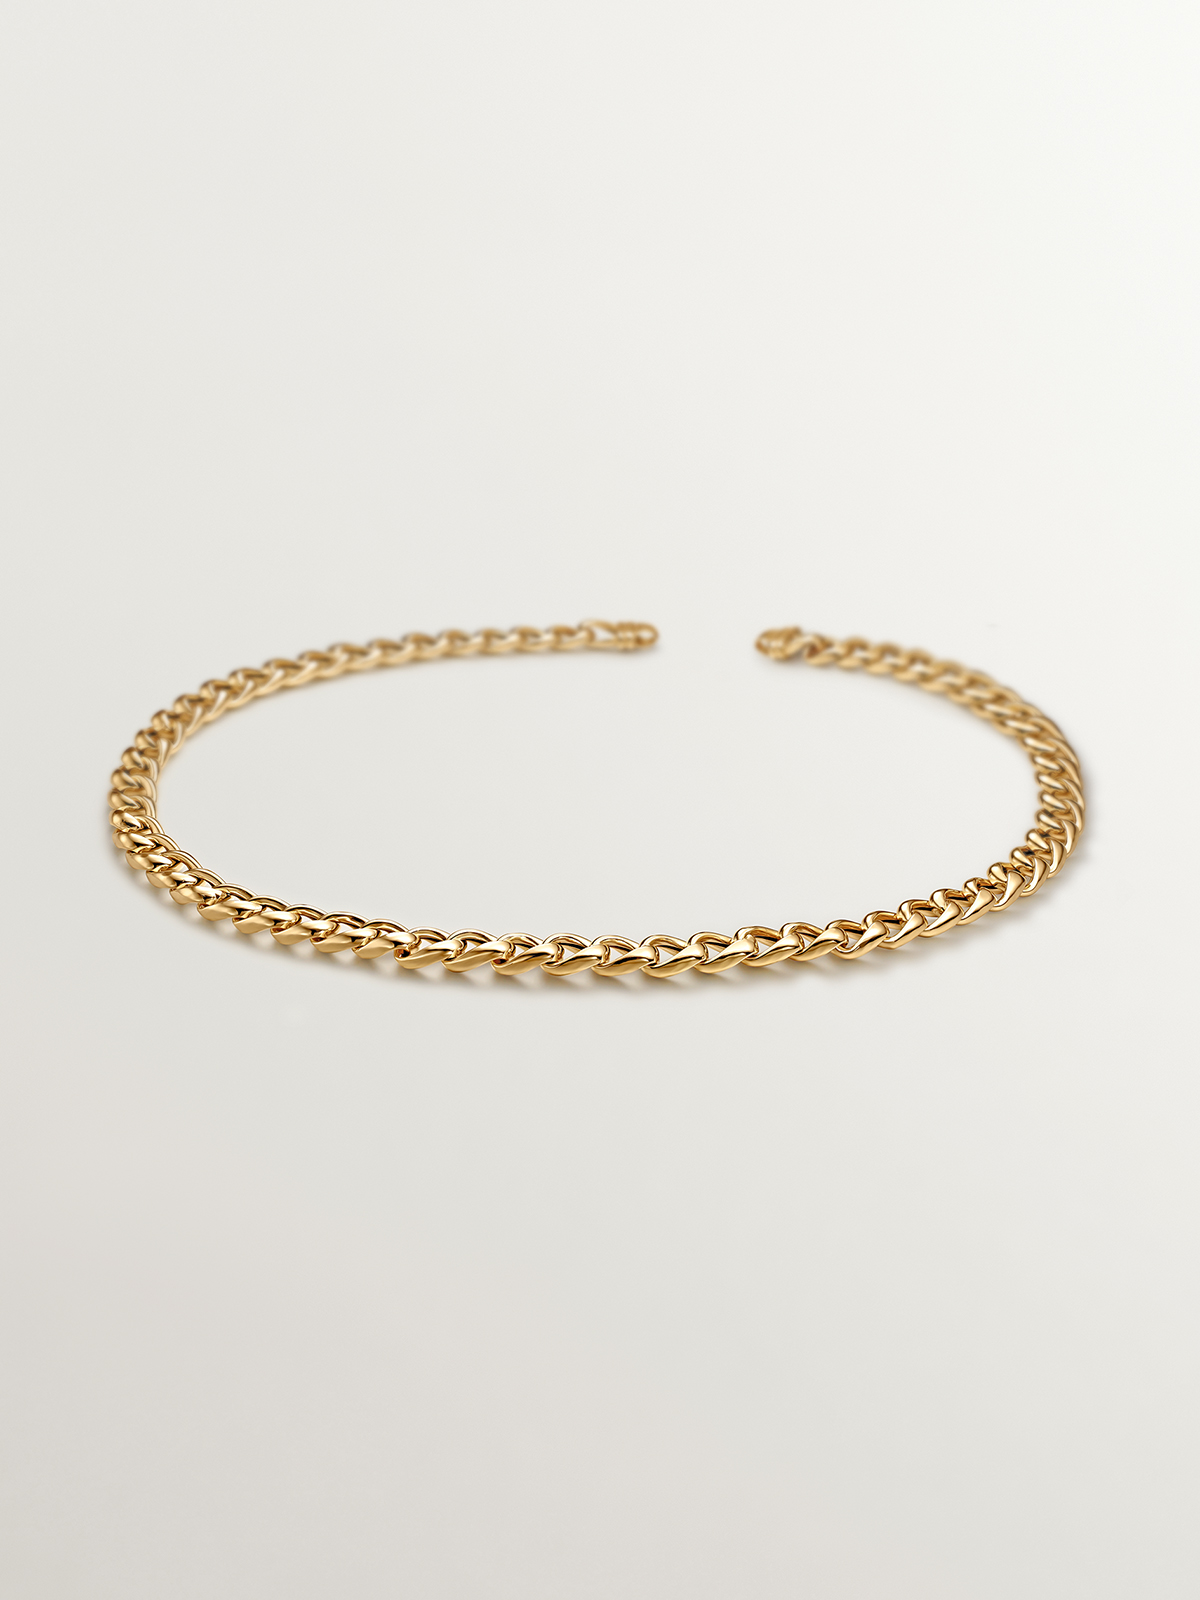 Barbed link chain made of 925 silver, bathed in 18K yellow gold.